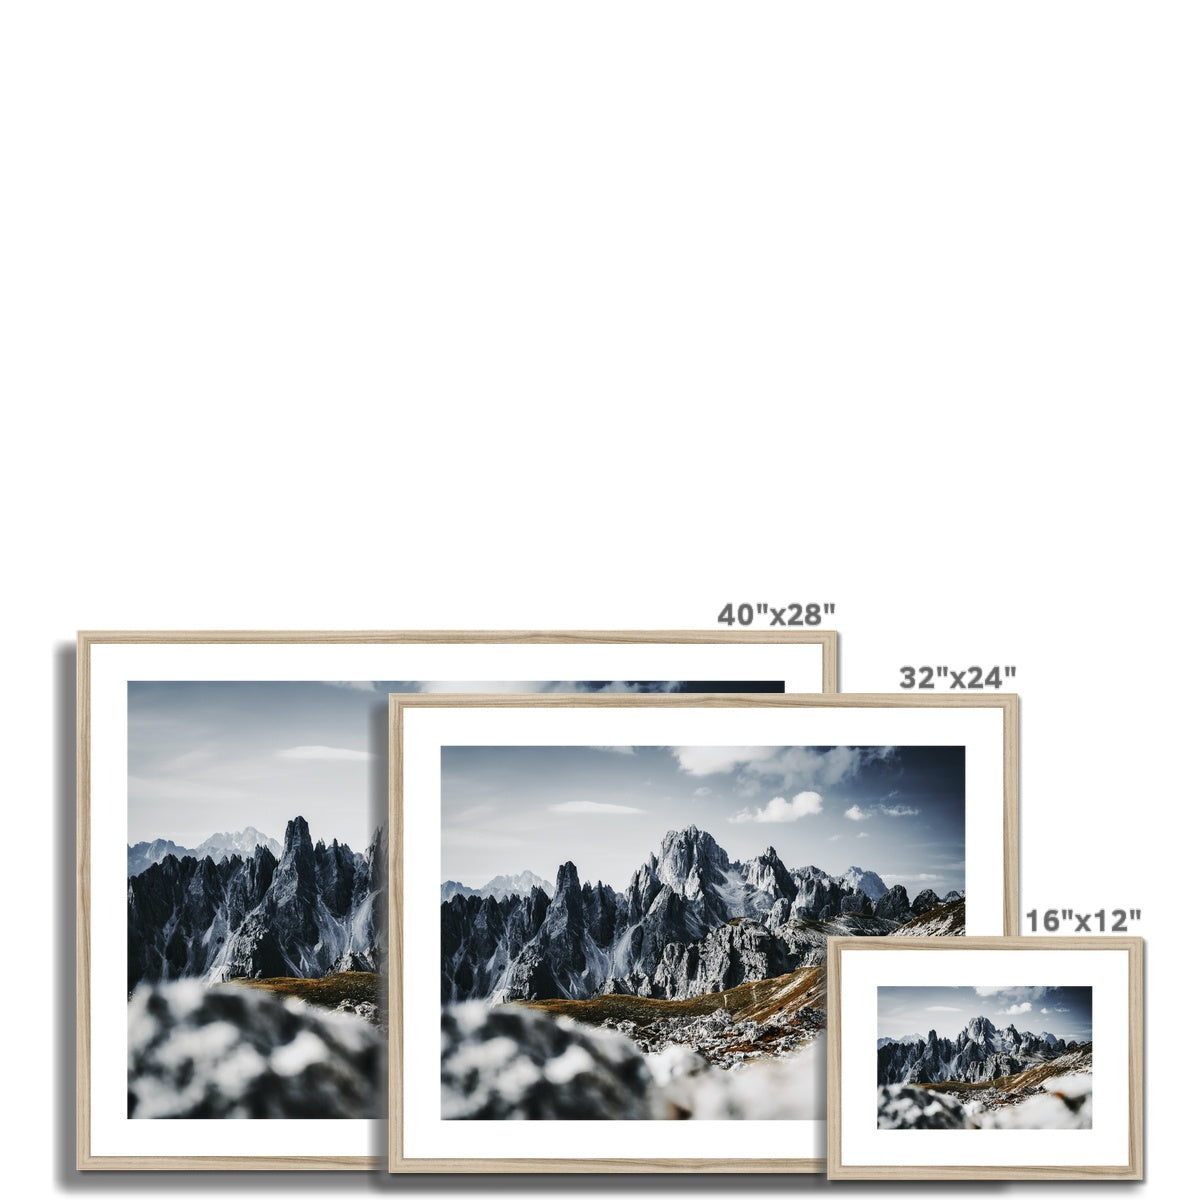 The Scope of Perfection - Framed Wall Art